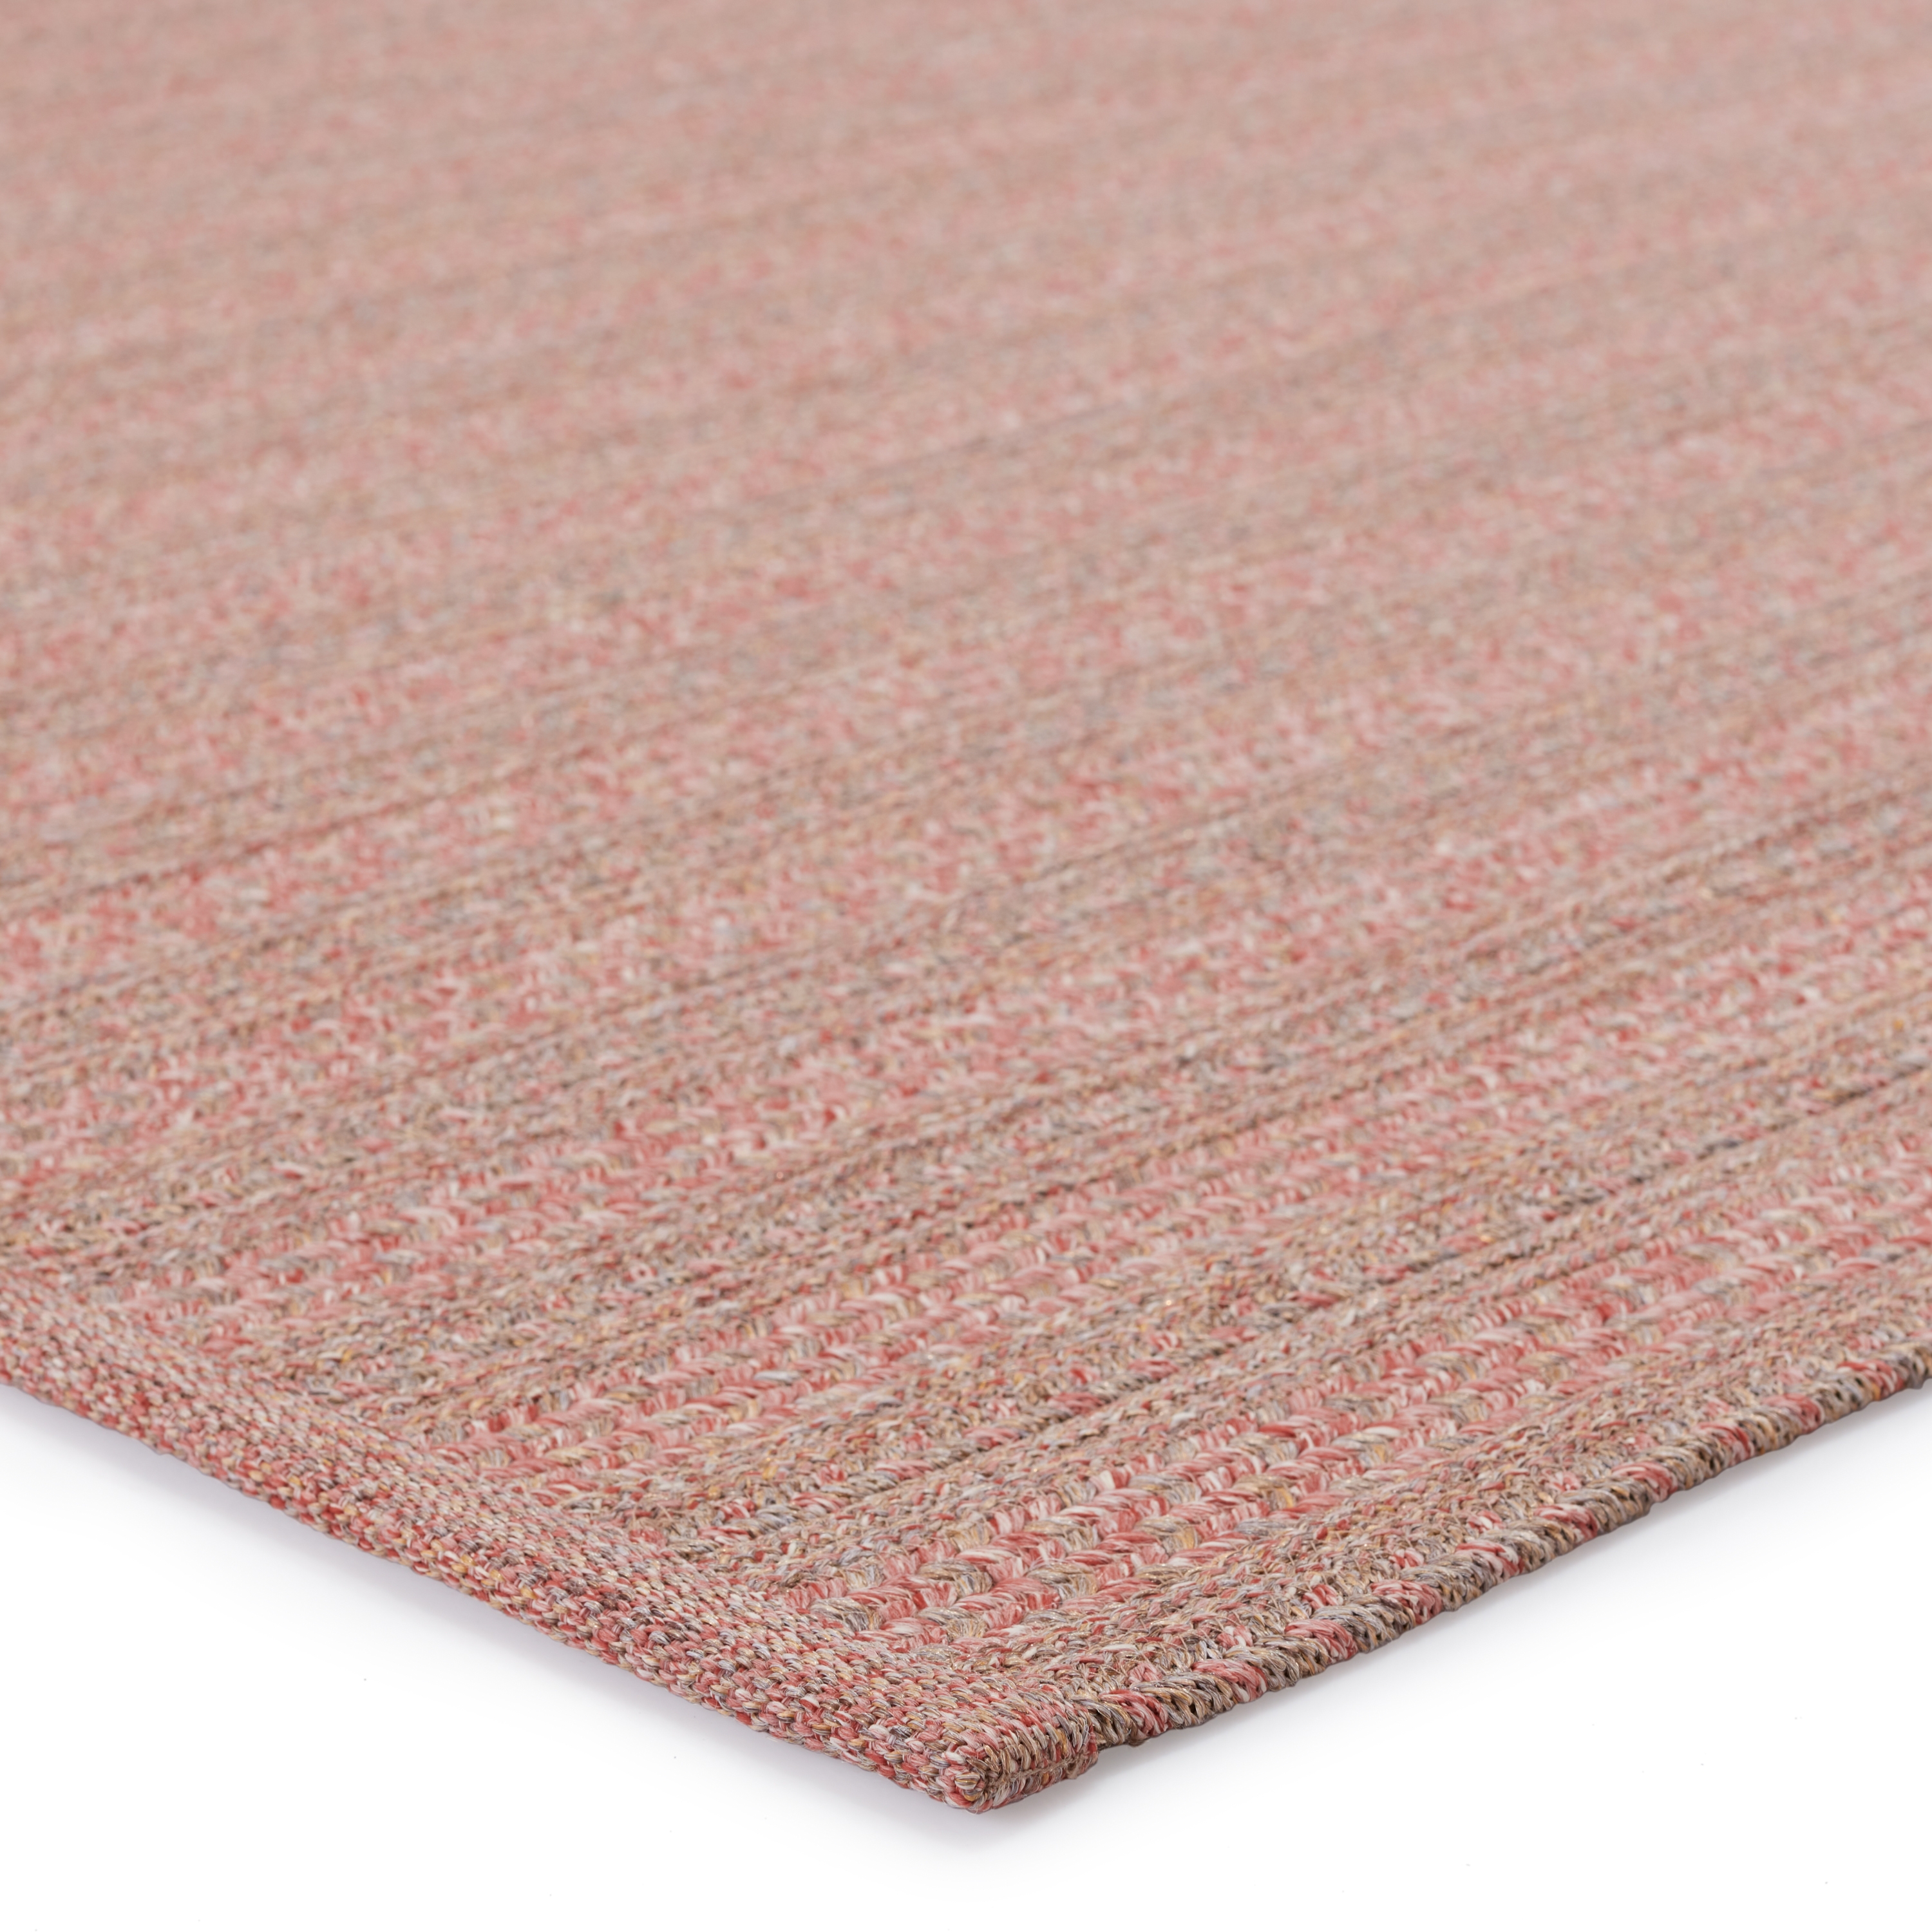 Topsail Indoor/ Outdoor Striped Rose/ Taupe Area Rug (4'X6') - Image 1